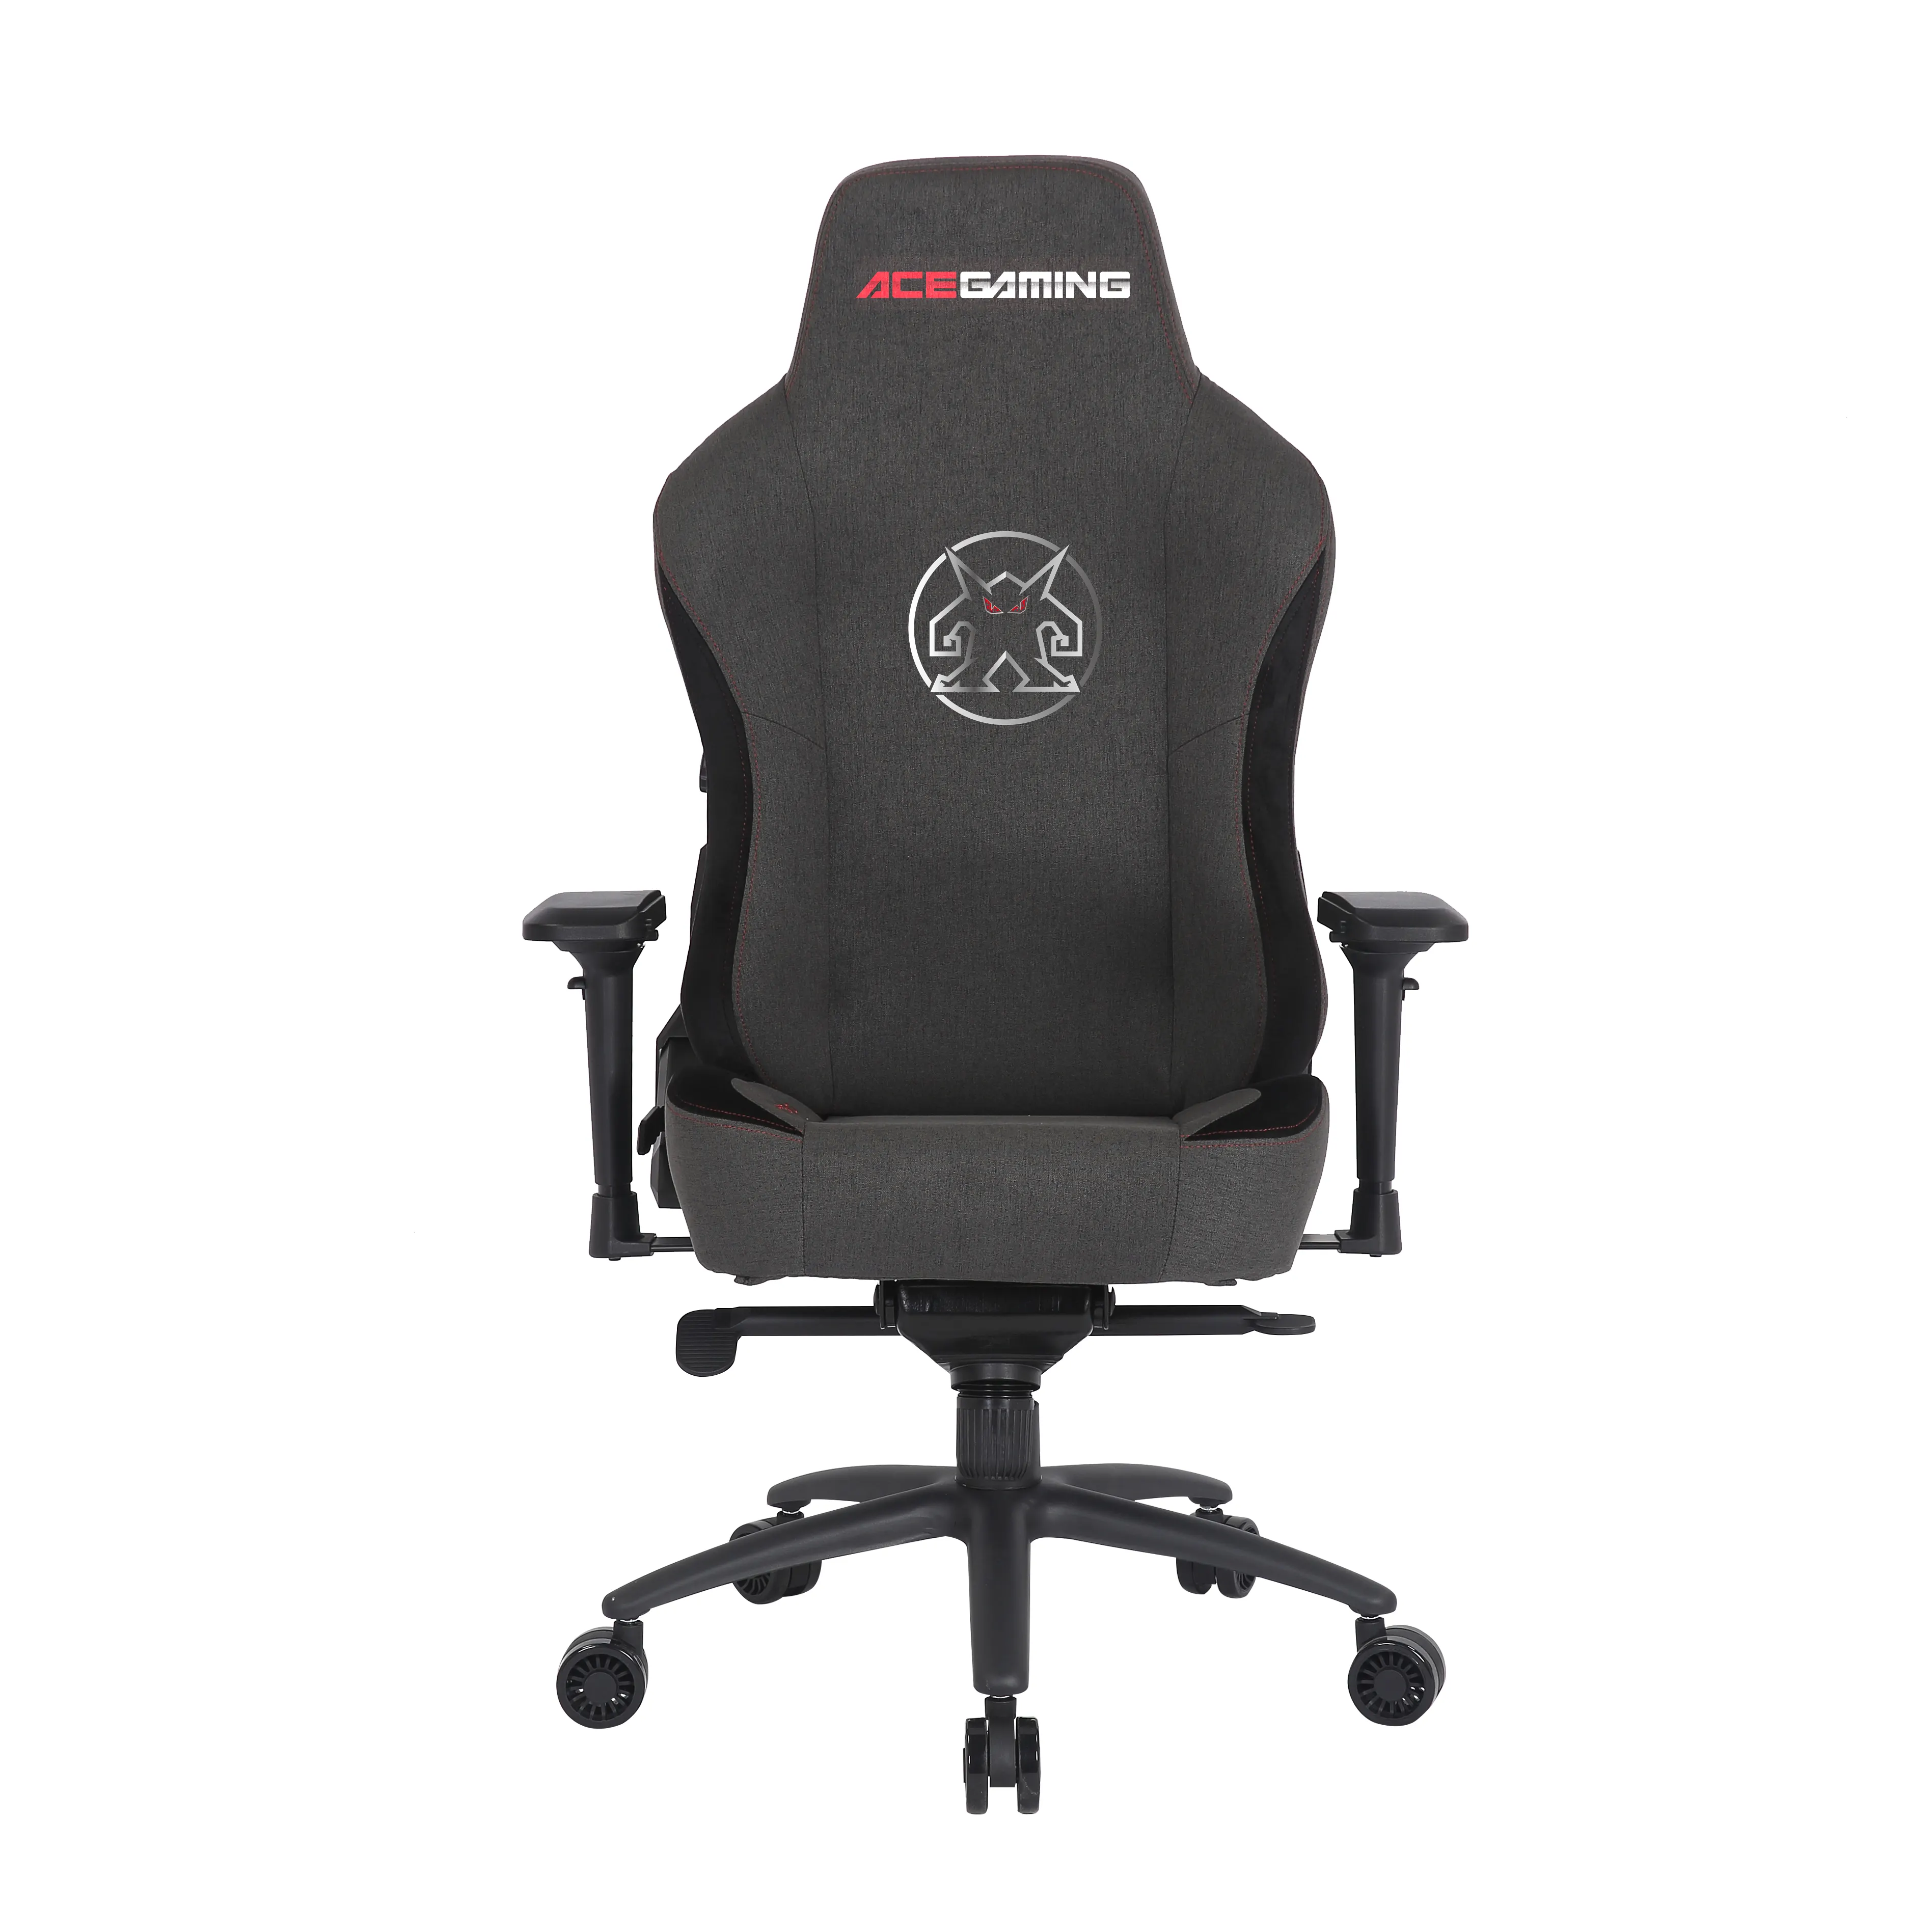 April Game G6200 Racing high quality OEM gaming chair workwell Logo Swivel Seat adjustable PC Gaming Race Office Chair